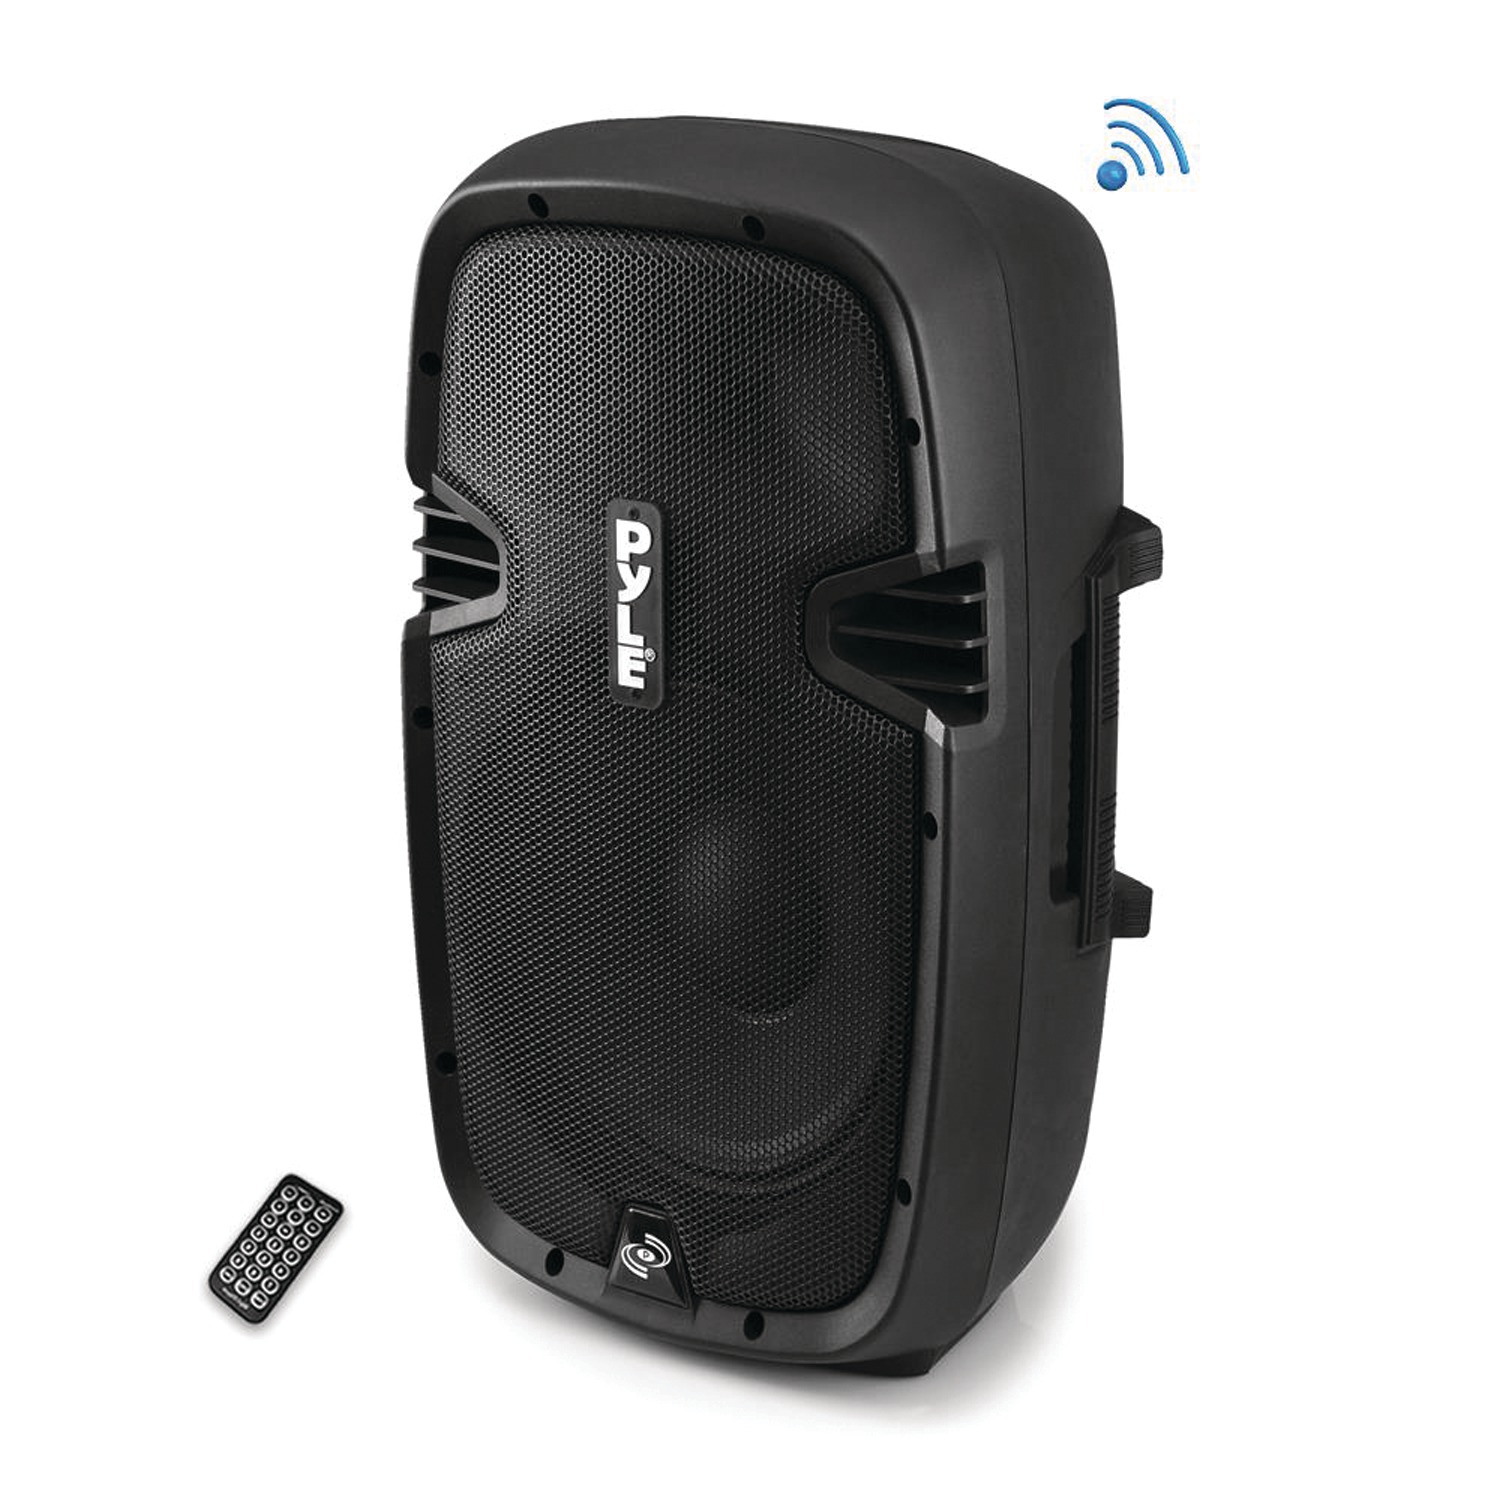 Pyle Pro PPHP1537UB 600W RMS Portable Bluetooth® Speaker System - image 2 of 7